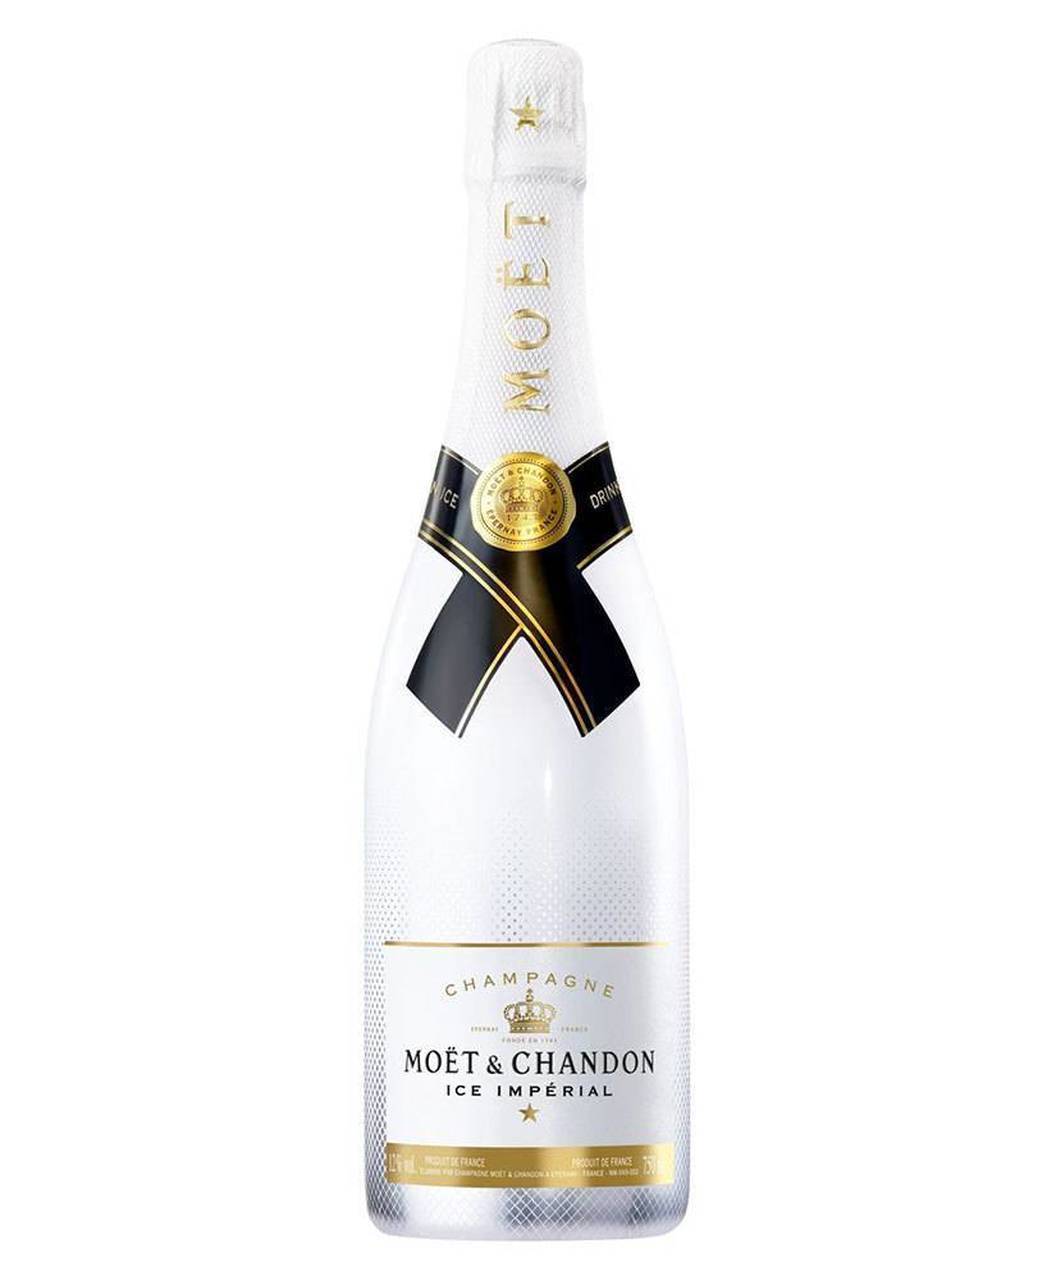 Moet & Chandon Champagne Ice Imperial - 750ML